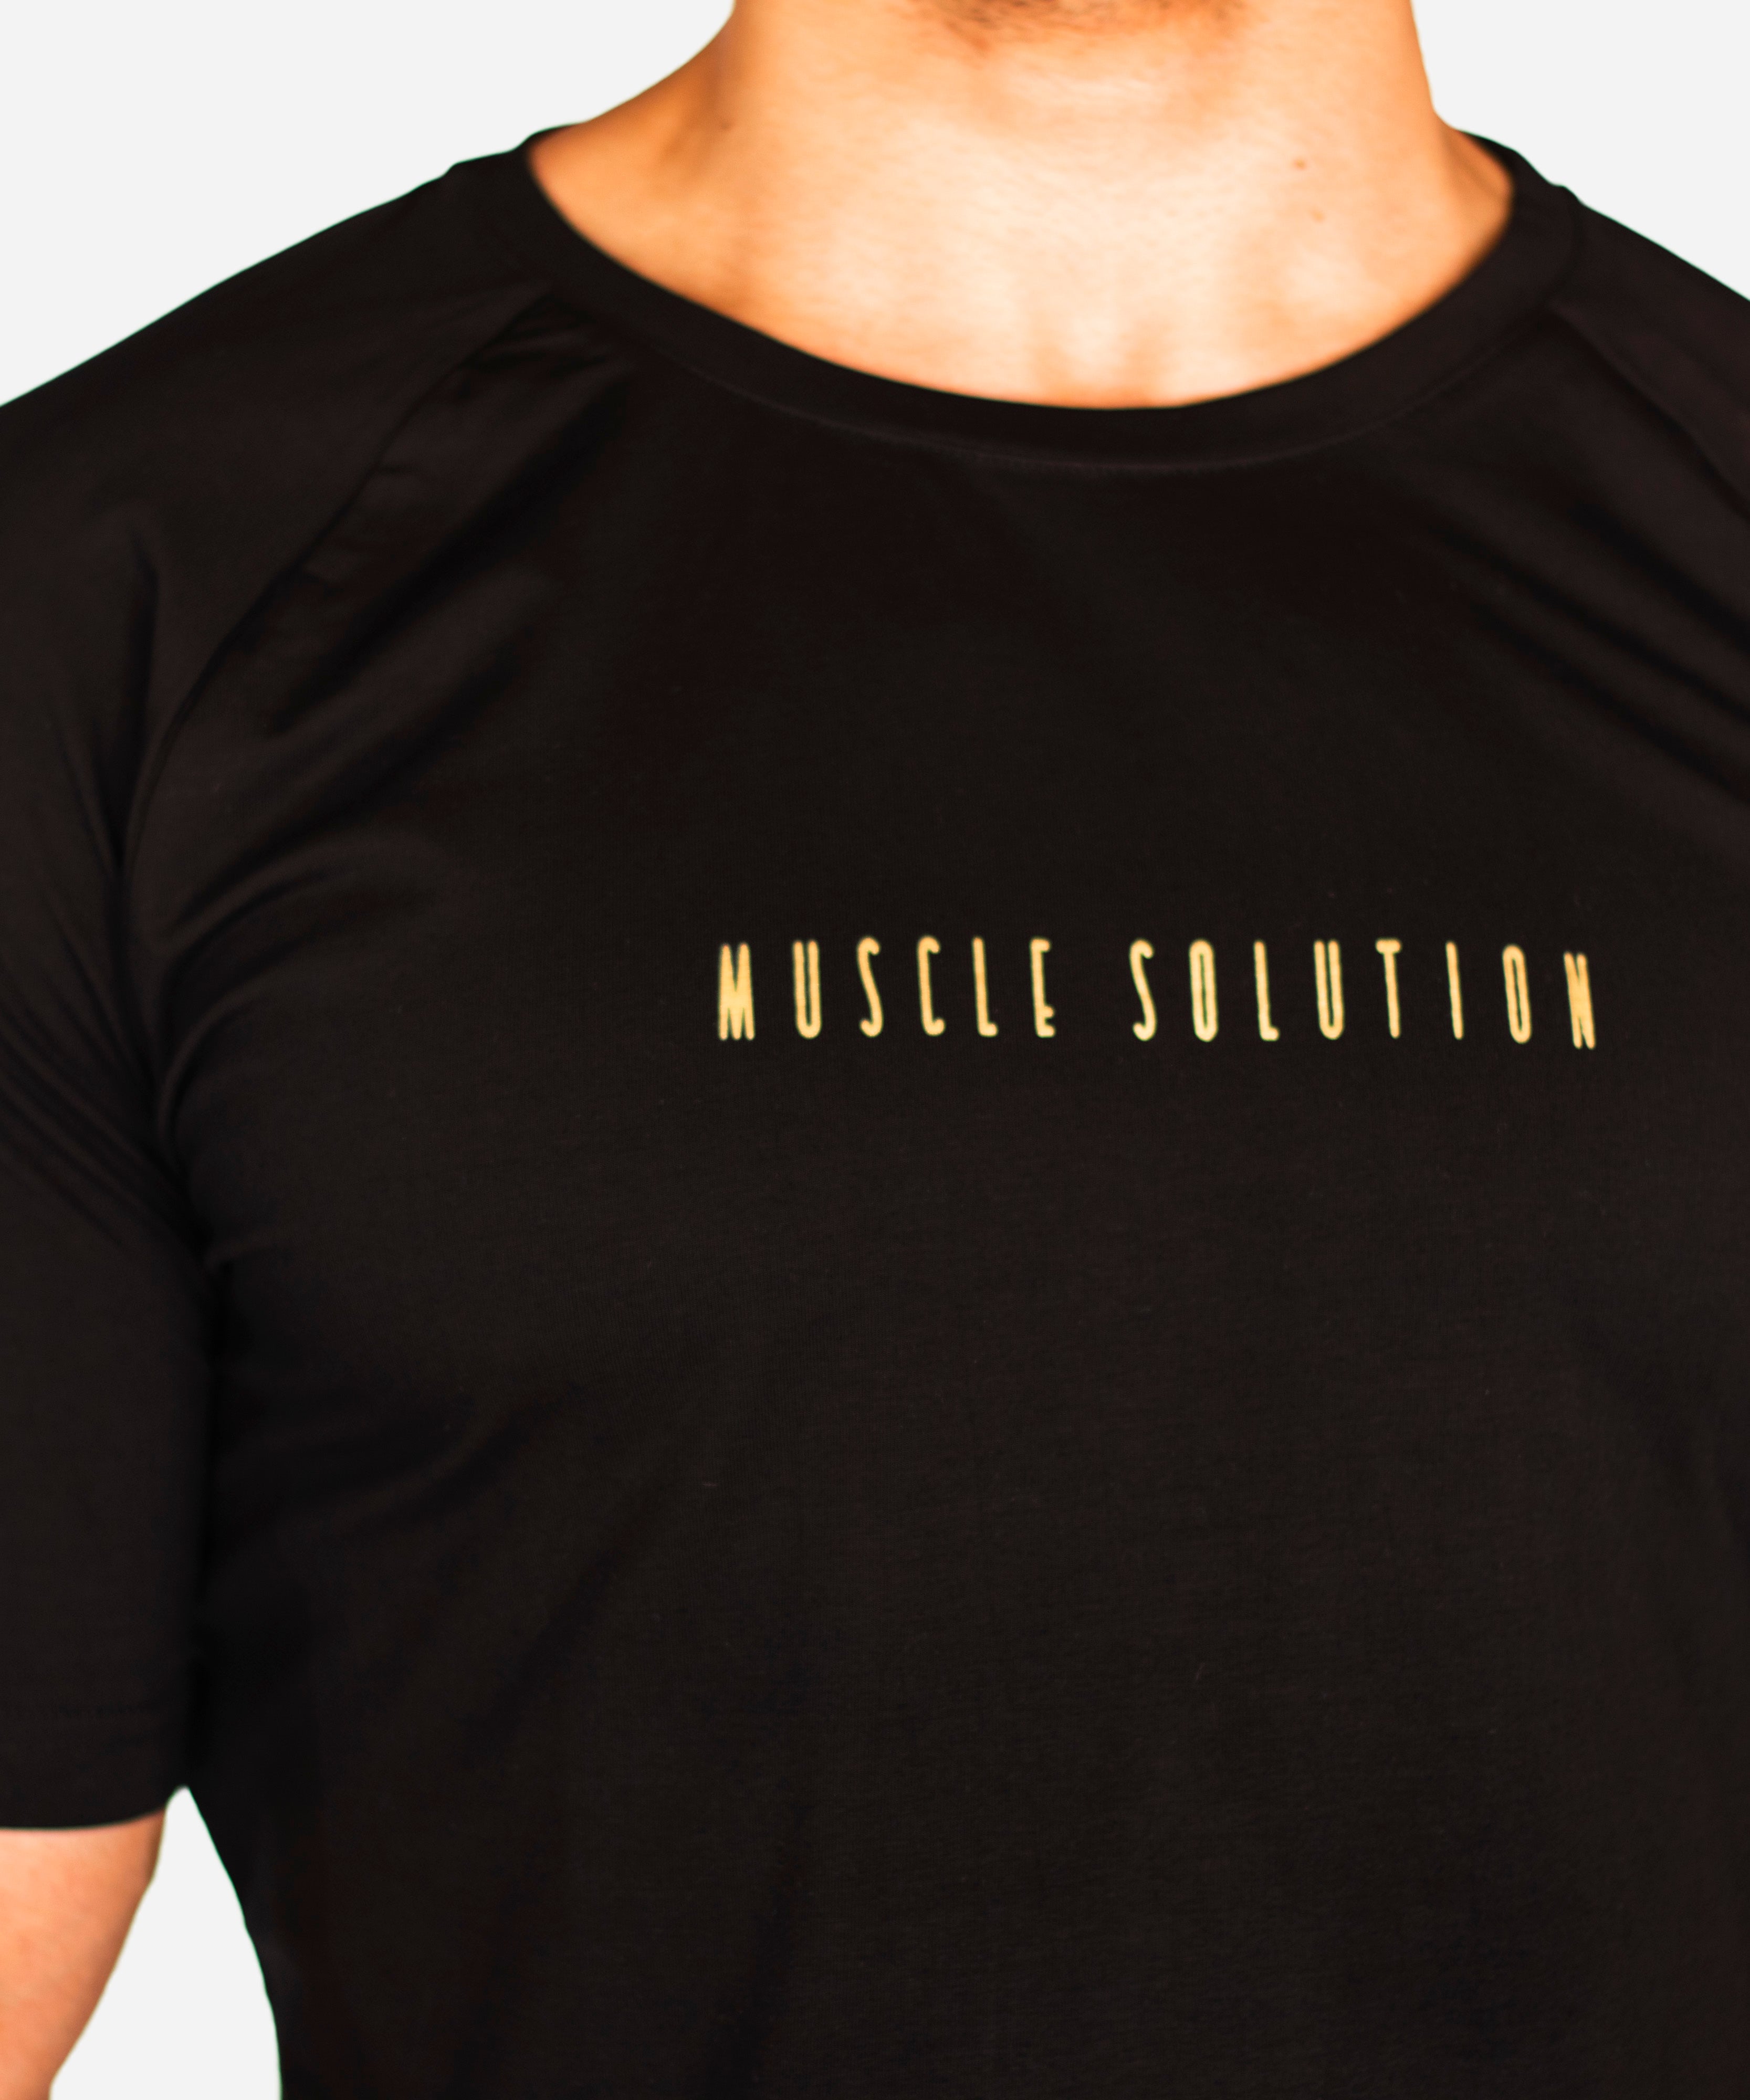 Muscle Solution Muscle TEE